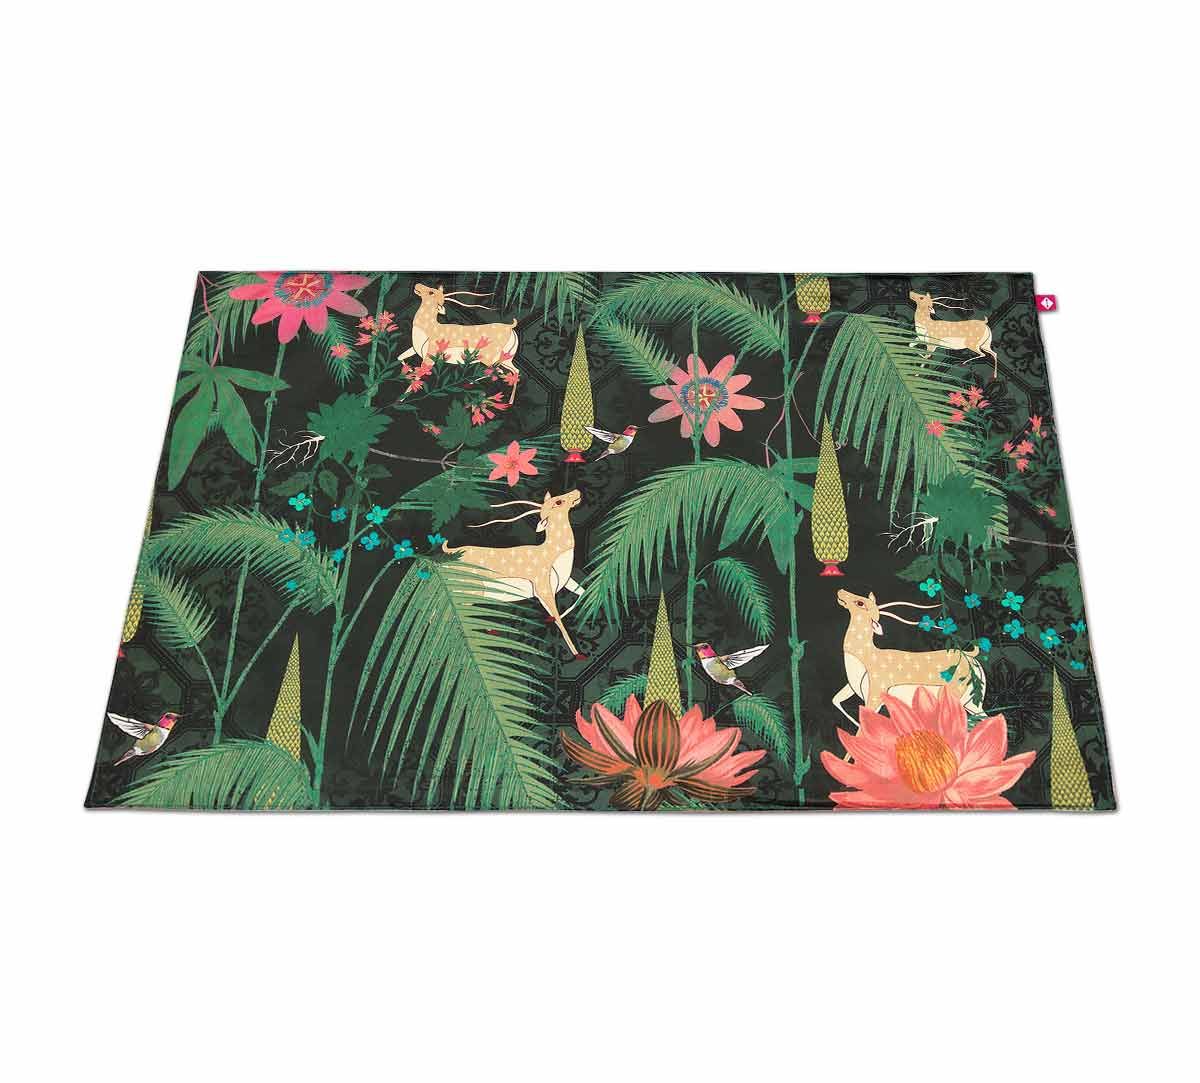 India Circus Forest Fetish Table Mats Set of 6